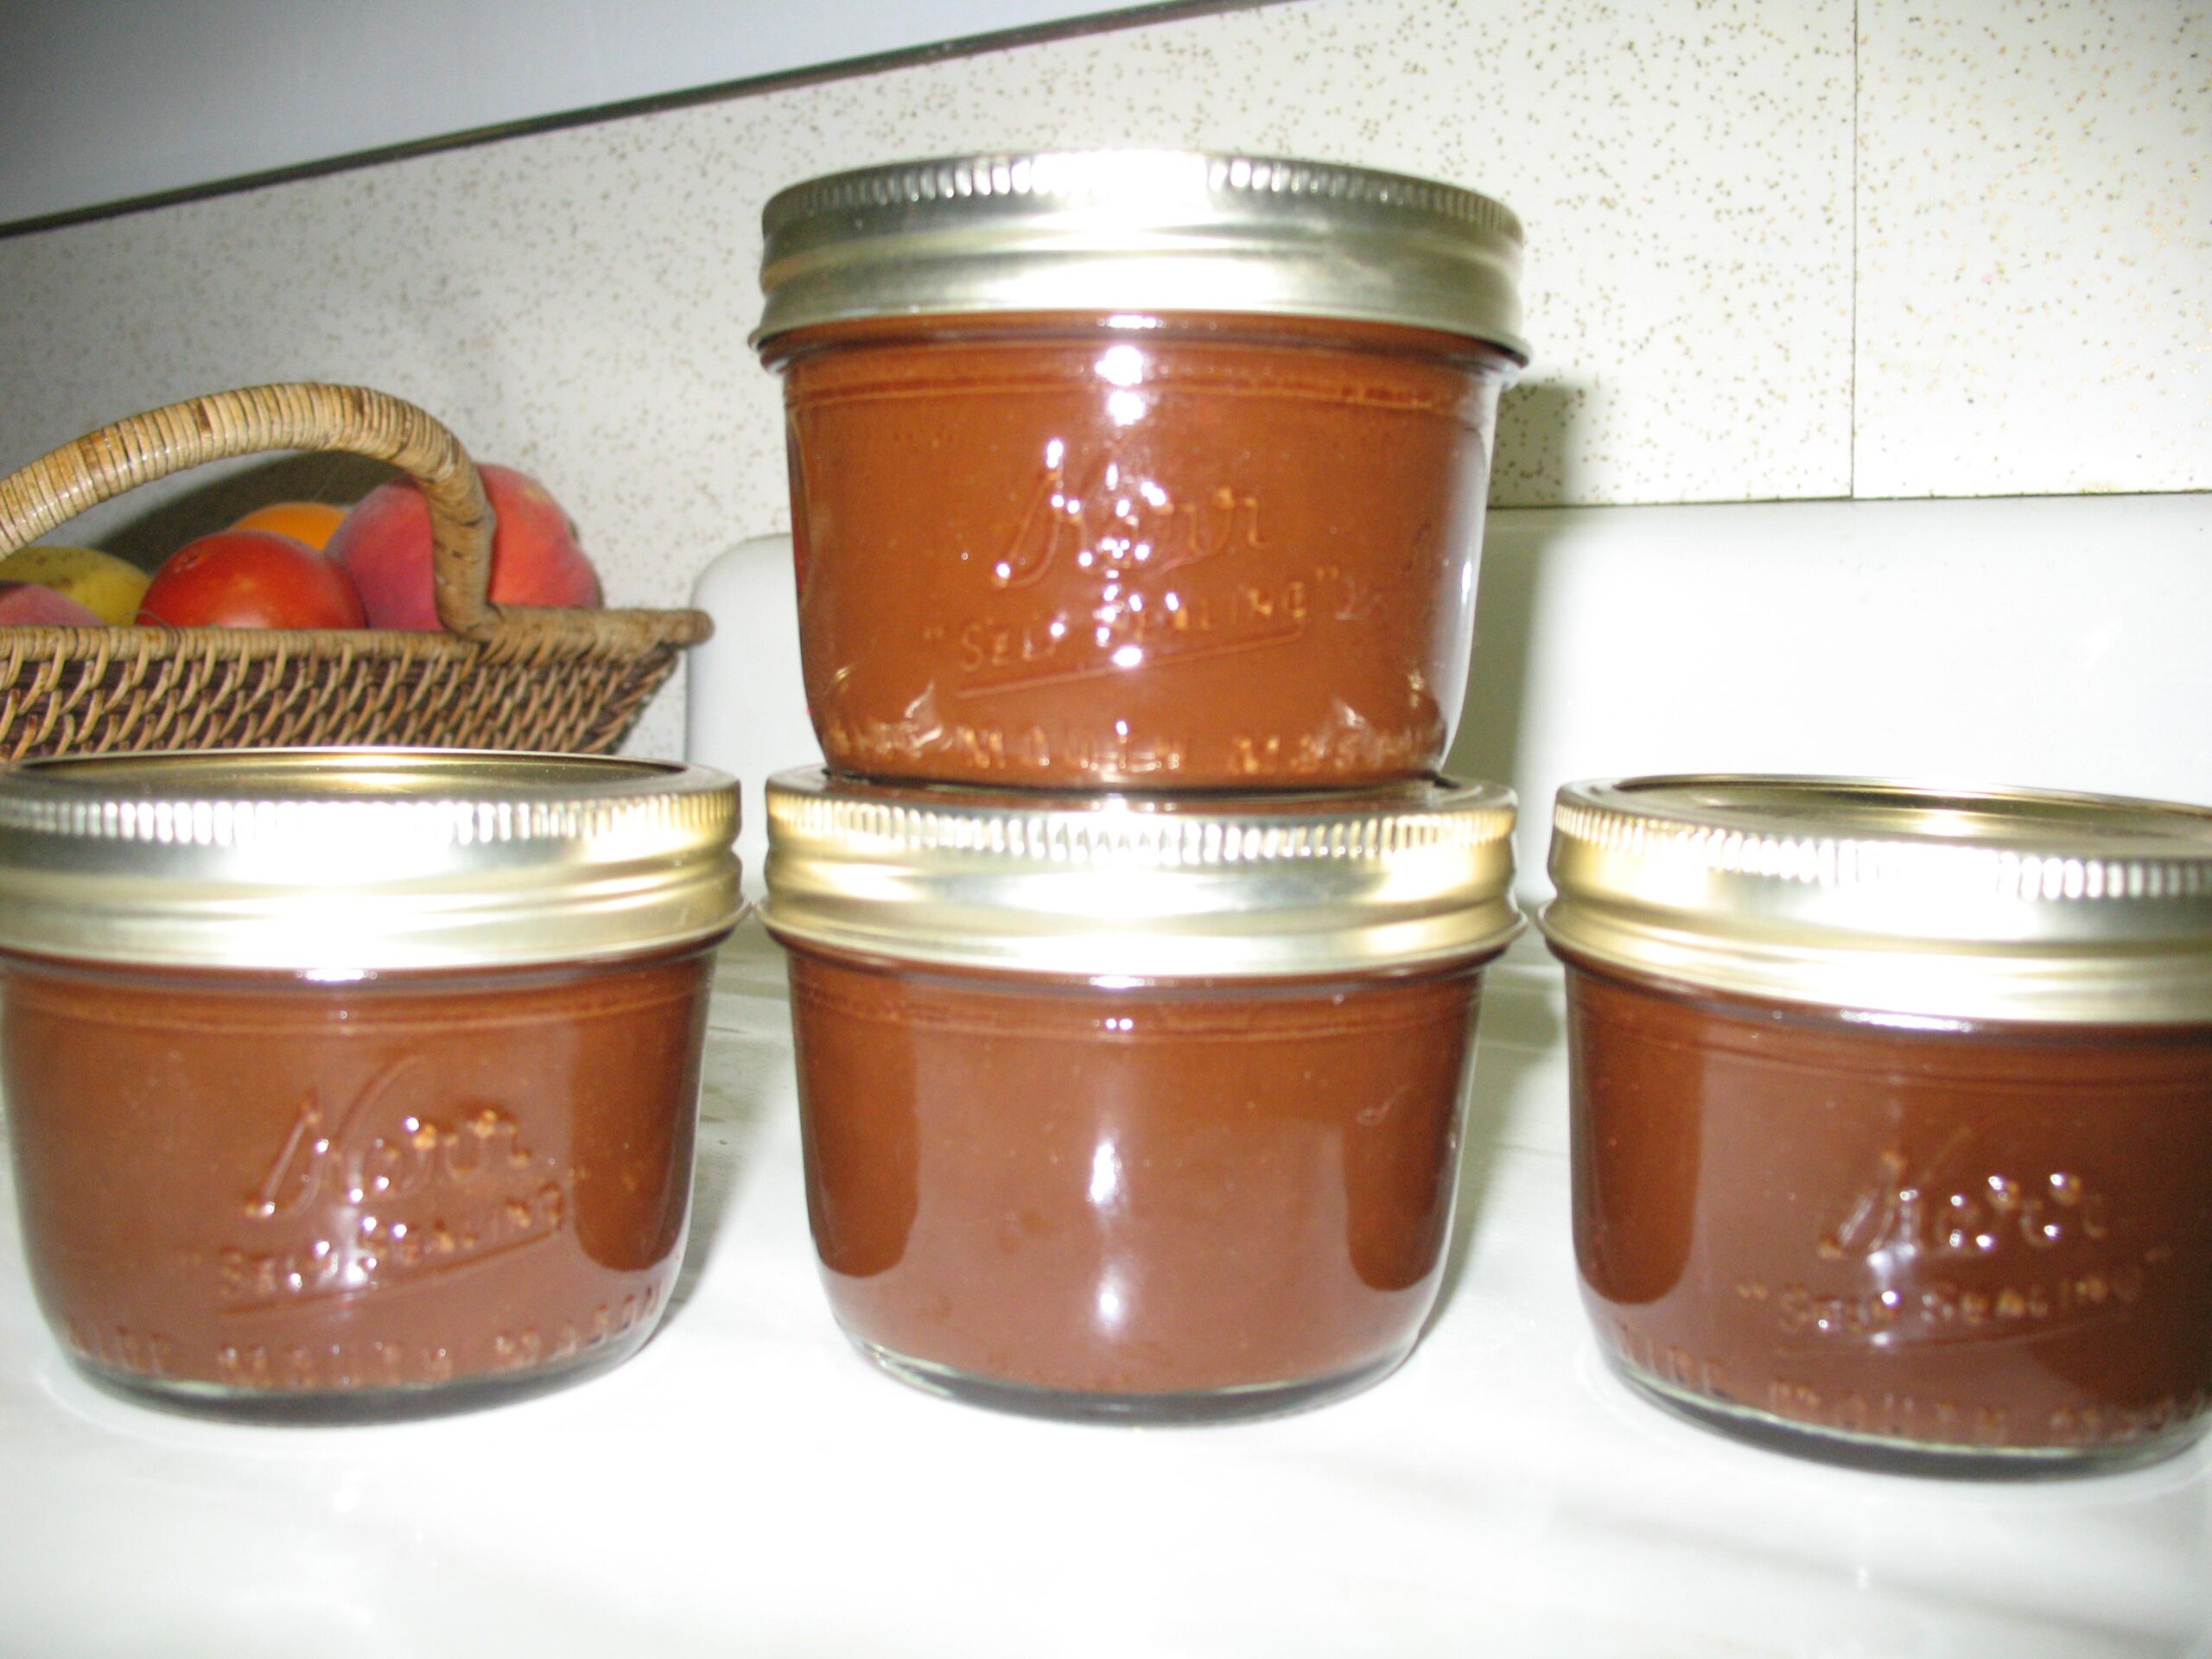  This is what dreams are made of - homemade Dulce de Leche.